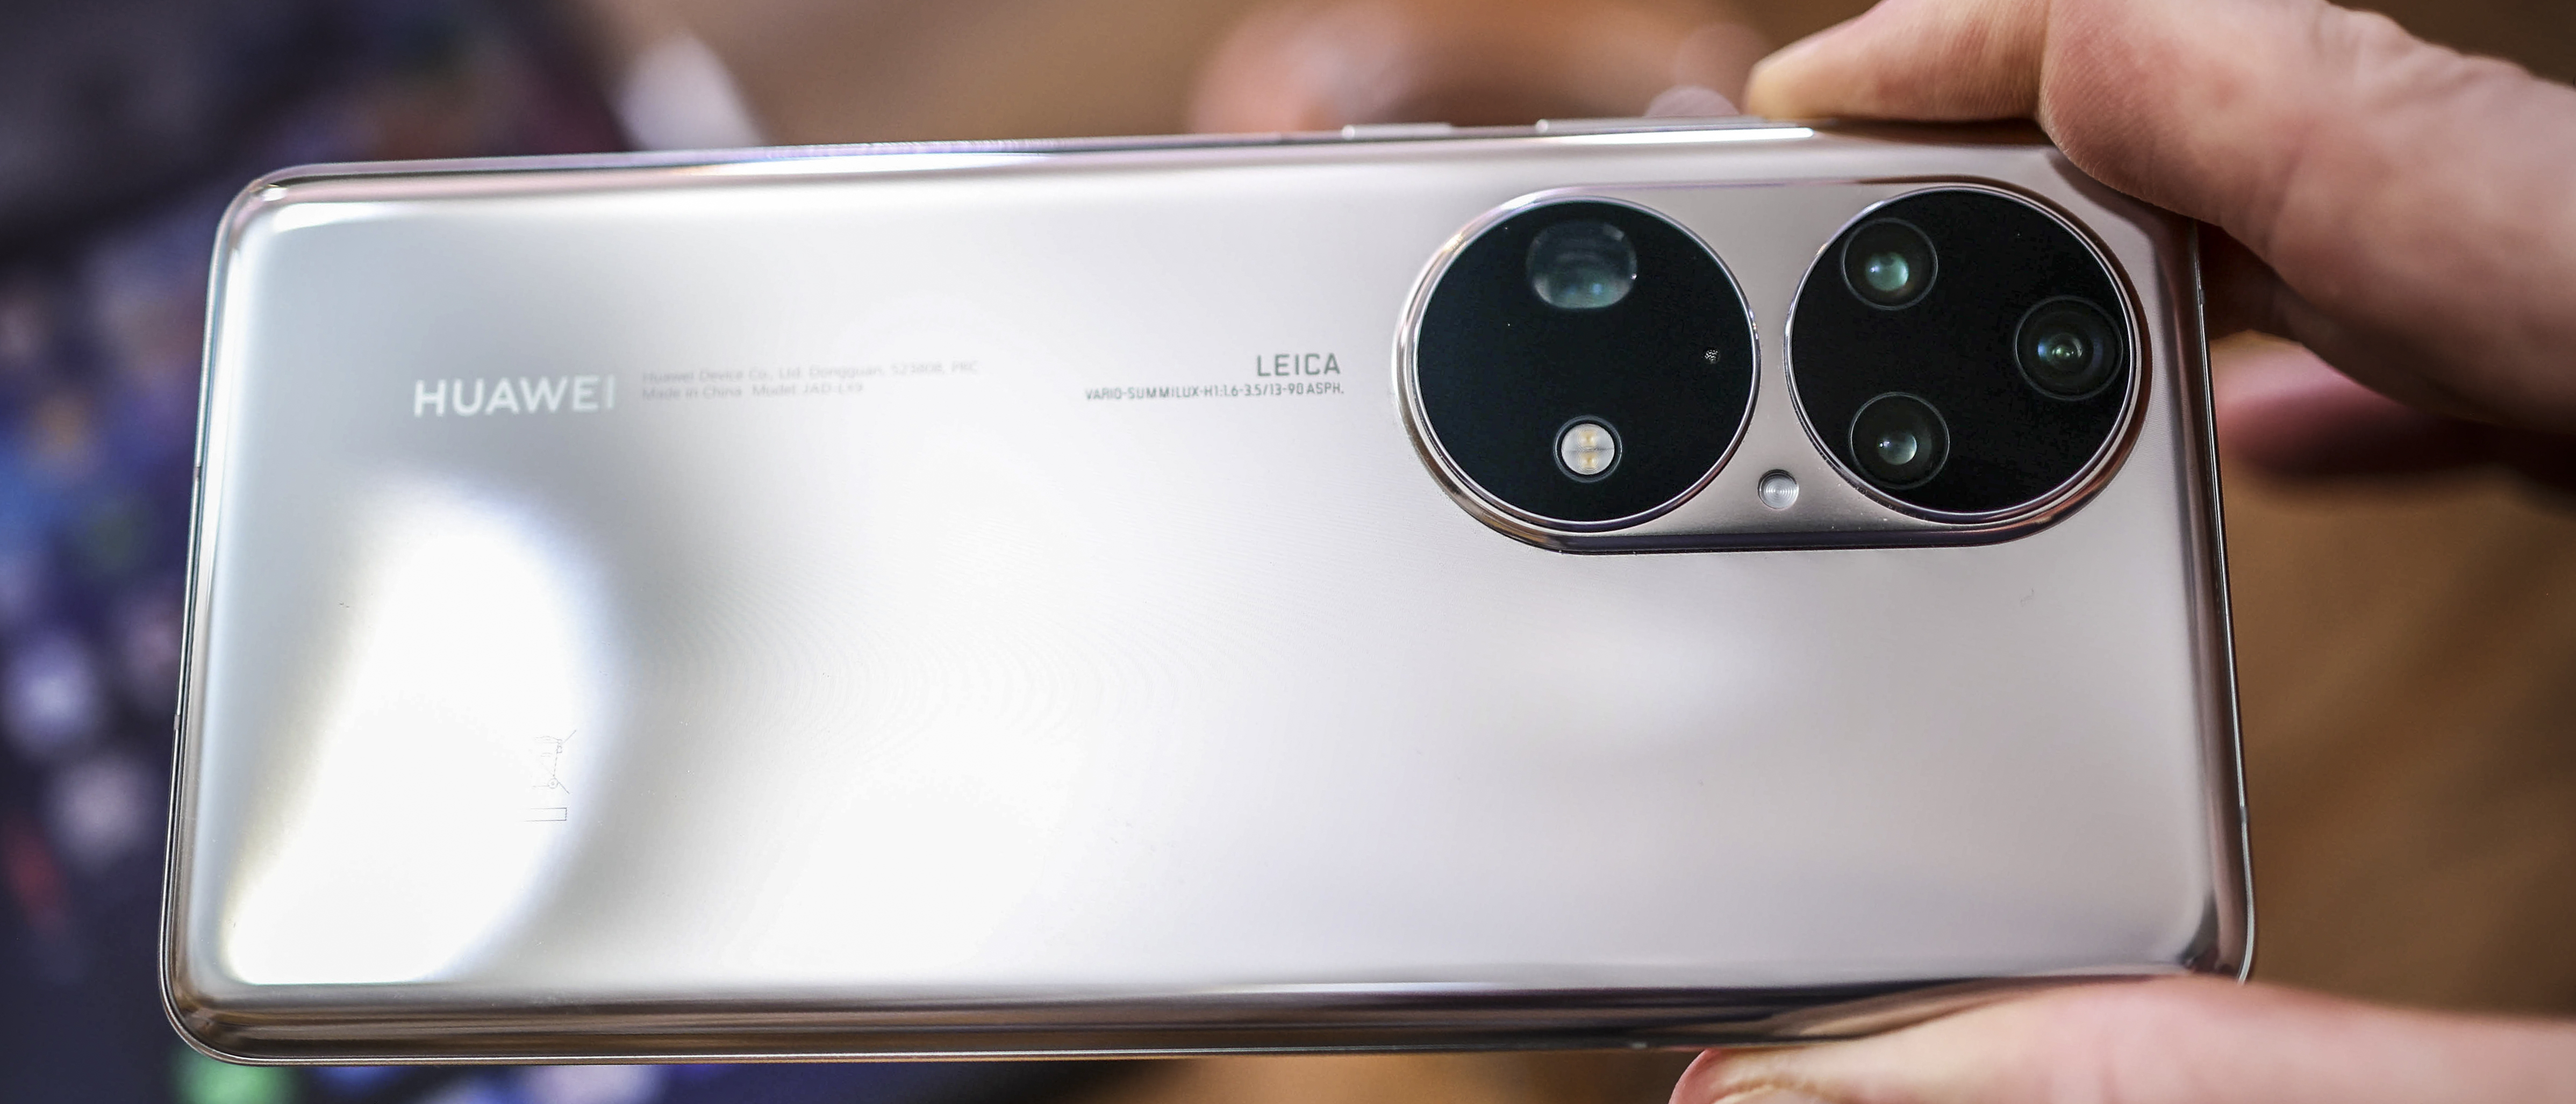 Huawei P50 Pro review - The camera reference among smartphones stands apart  -  Reviews